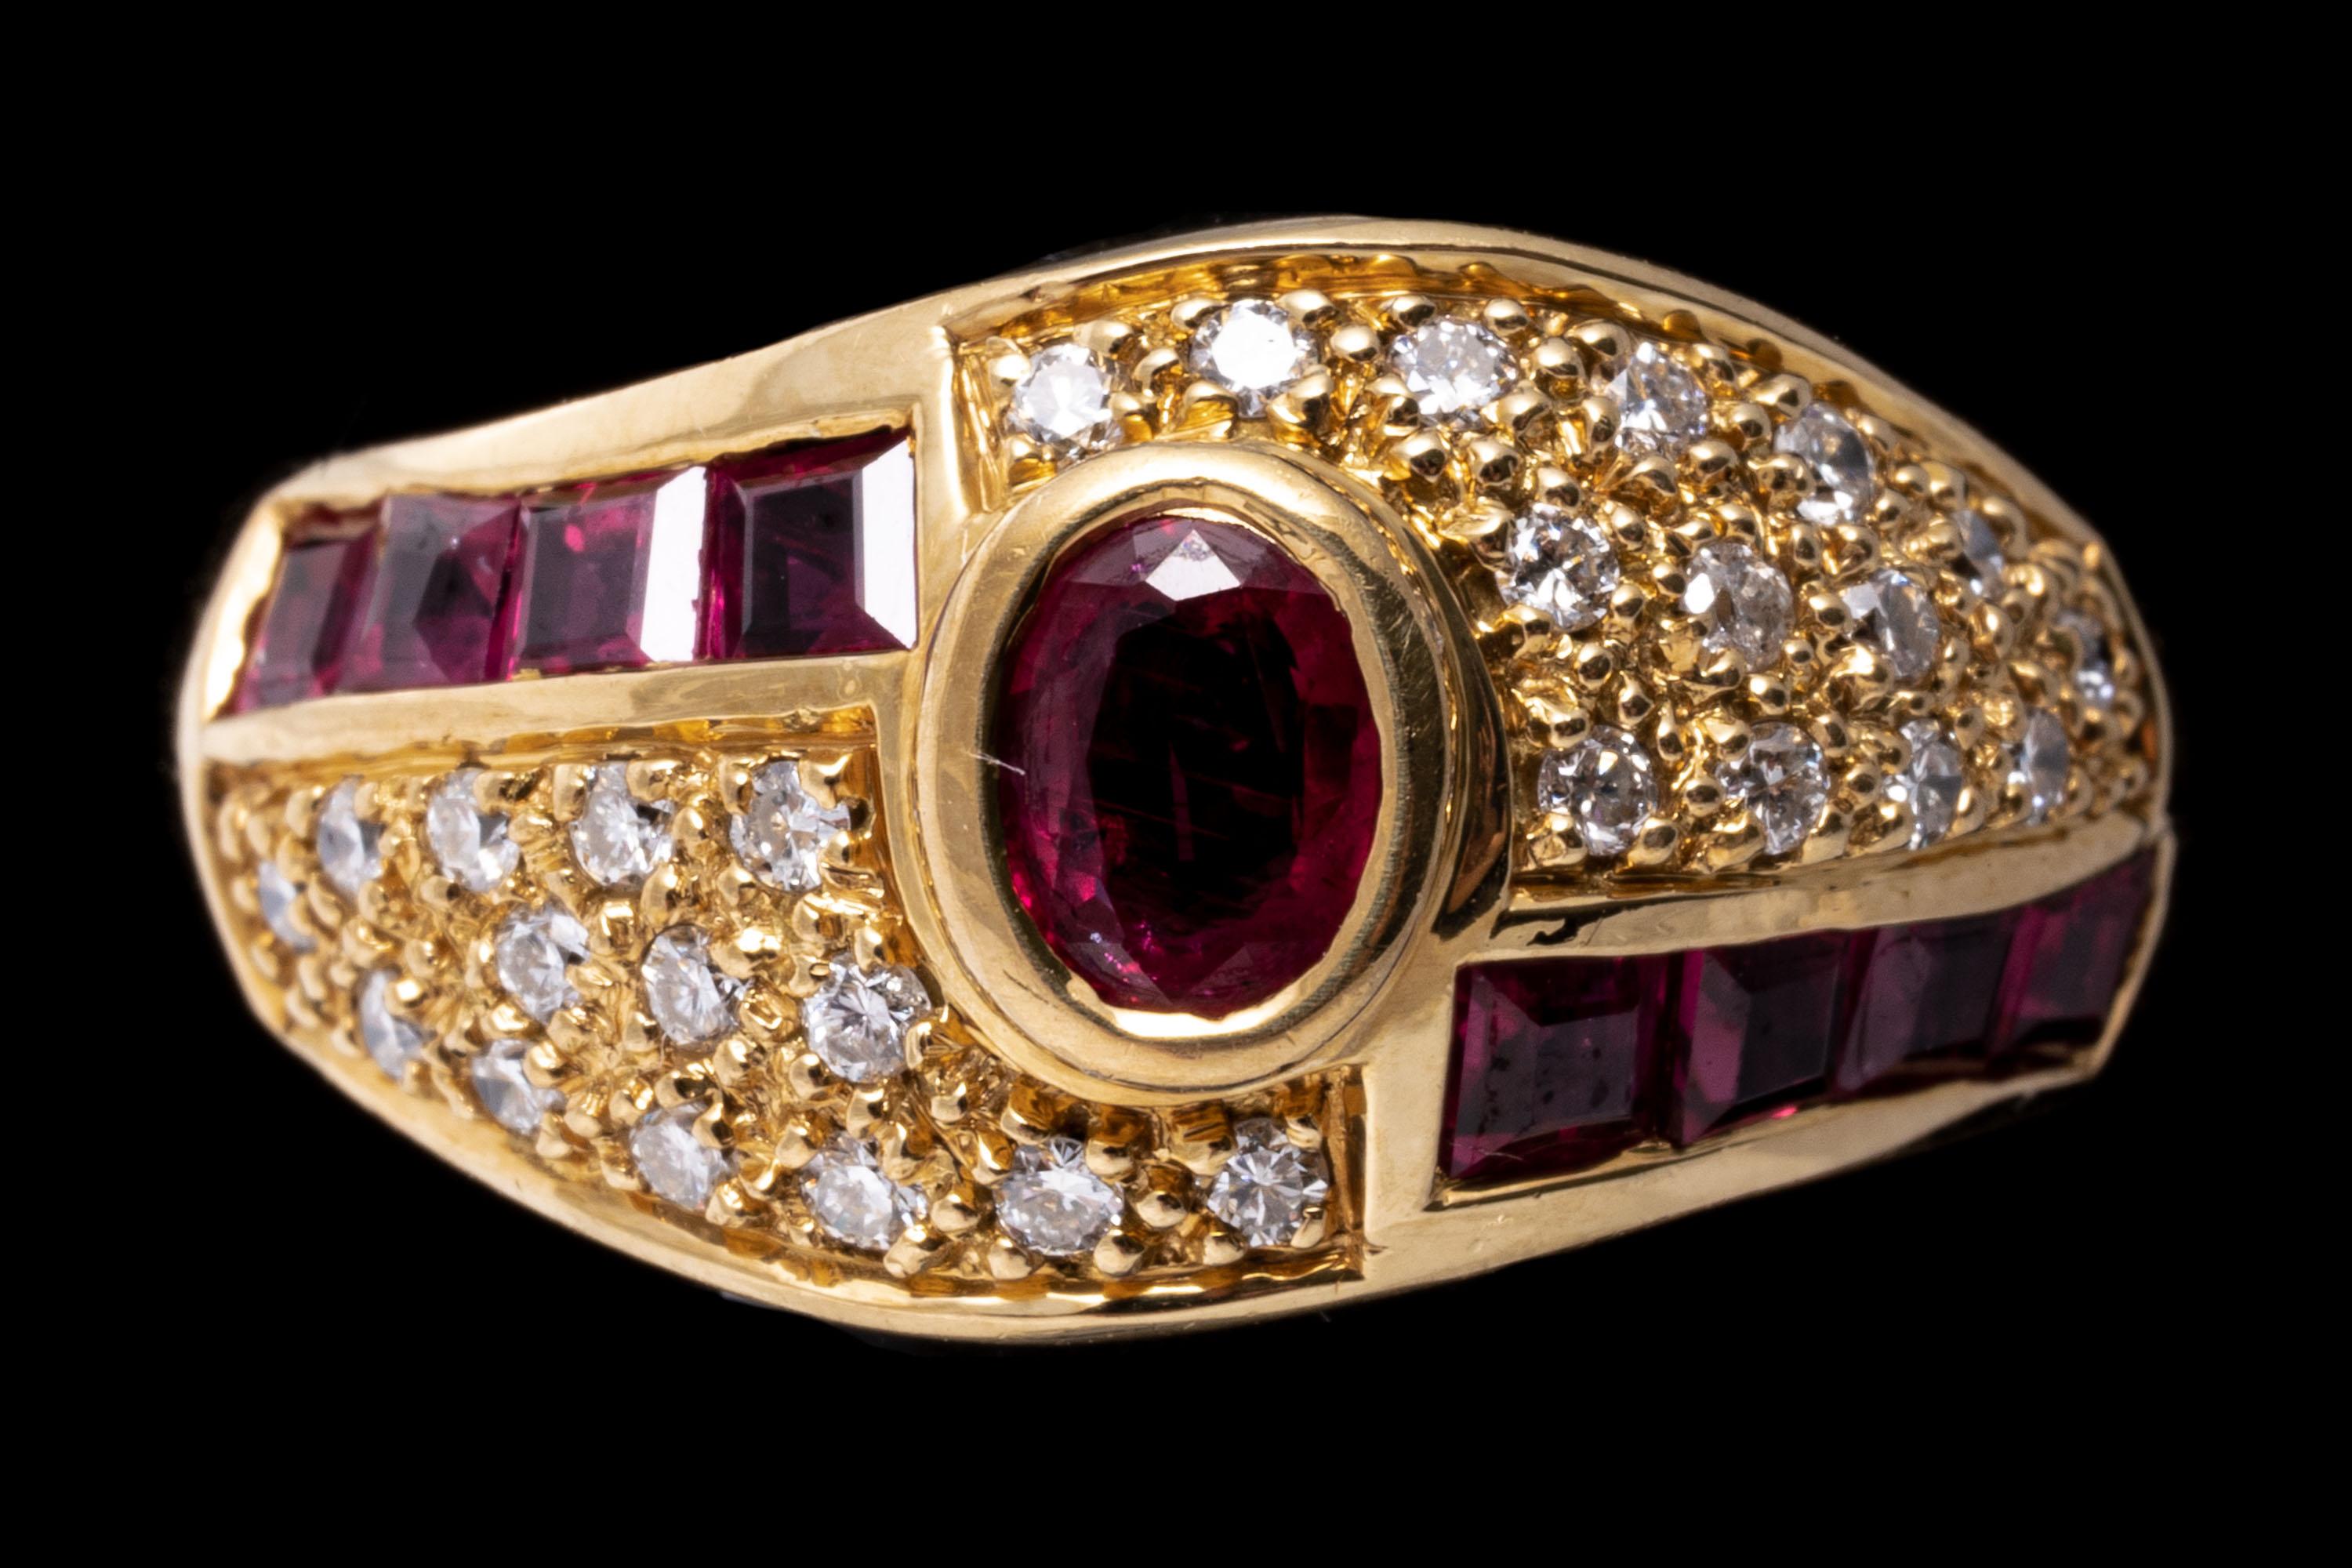 18k yellow gold ring. This gorgeous yellow gold dome ring is set with a center faceted oval, reddish pink color ruby, approximately 0.18 CTS, bezel set. The center is flanked by offset fields of pave set, round faceted diamonds, approximately 0.14